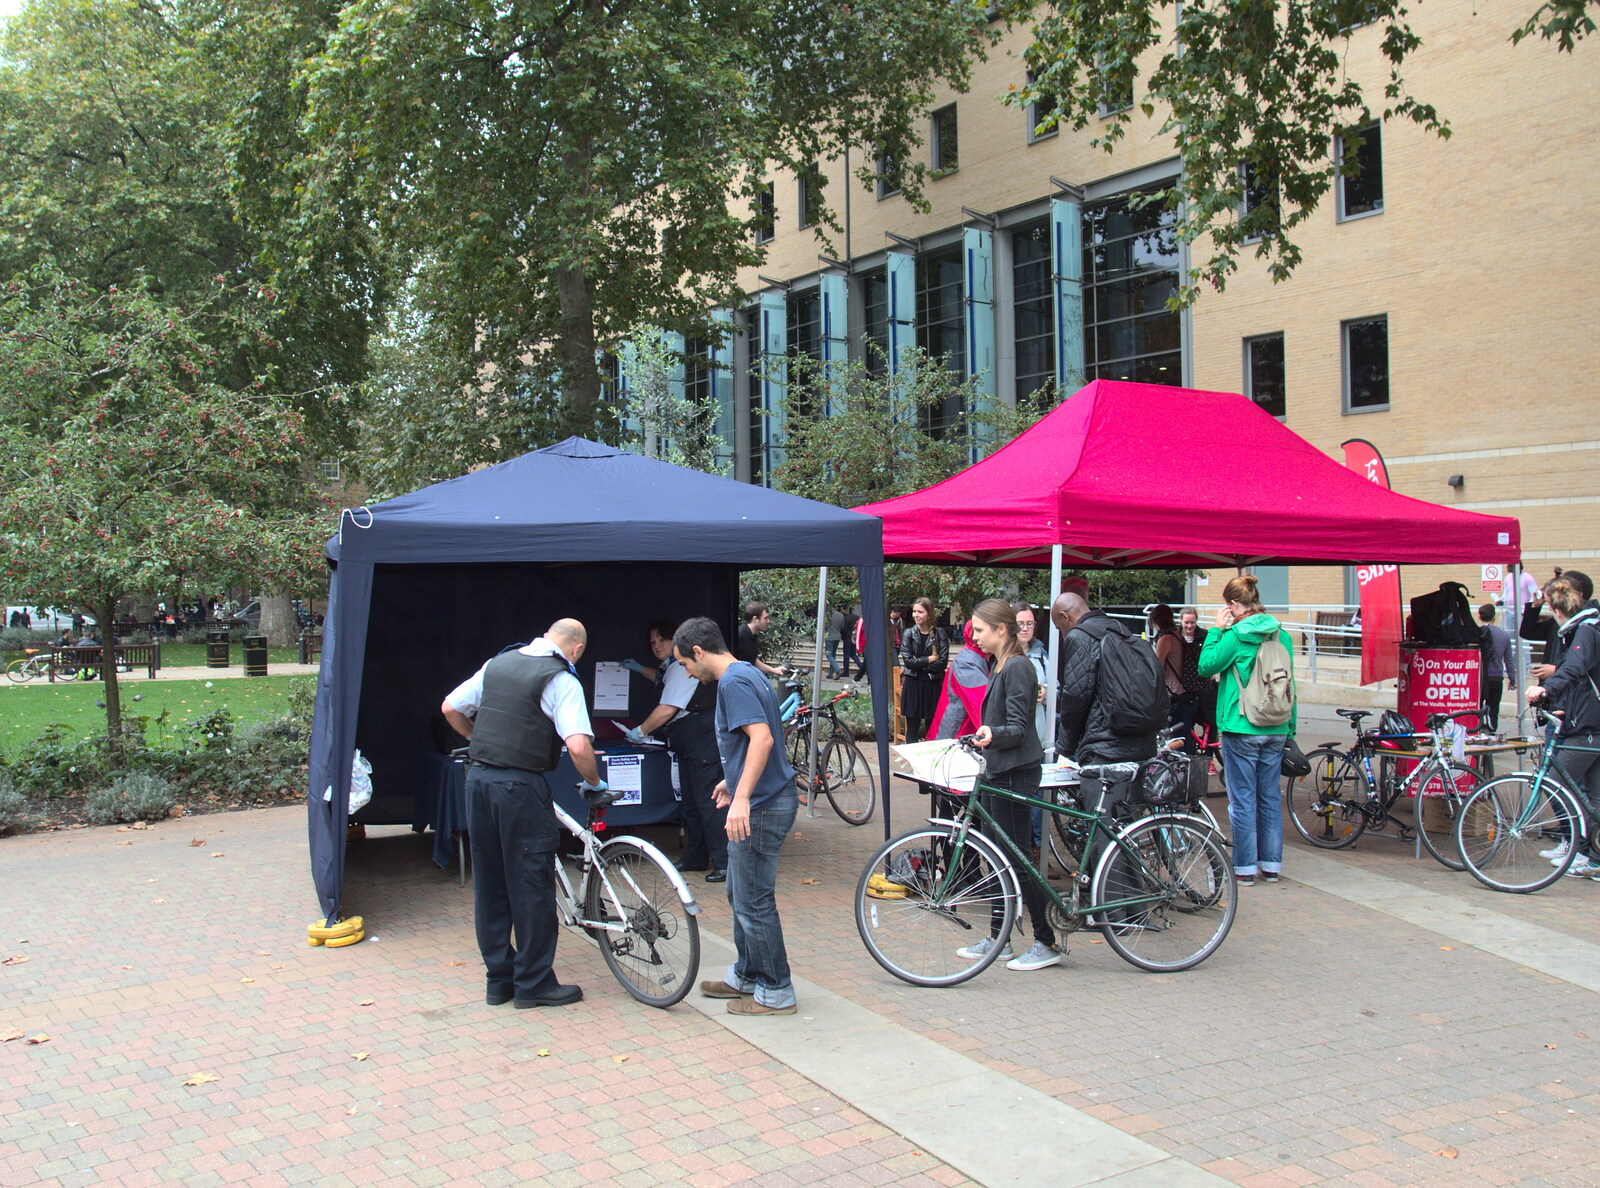 Bike marking in Guy's Hospital quad from (Very) Long Train (Not) Running, Stowmarket, Suffolk - 21st October 2014